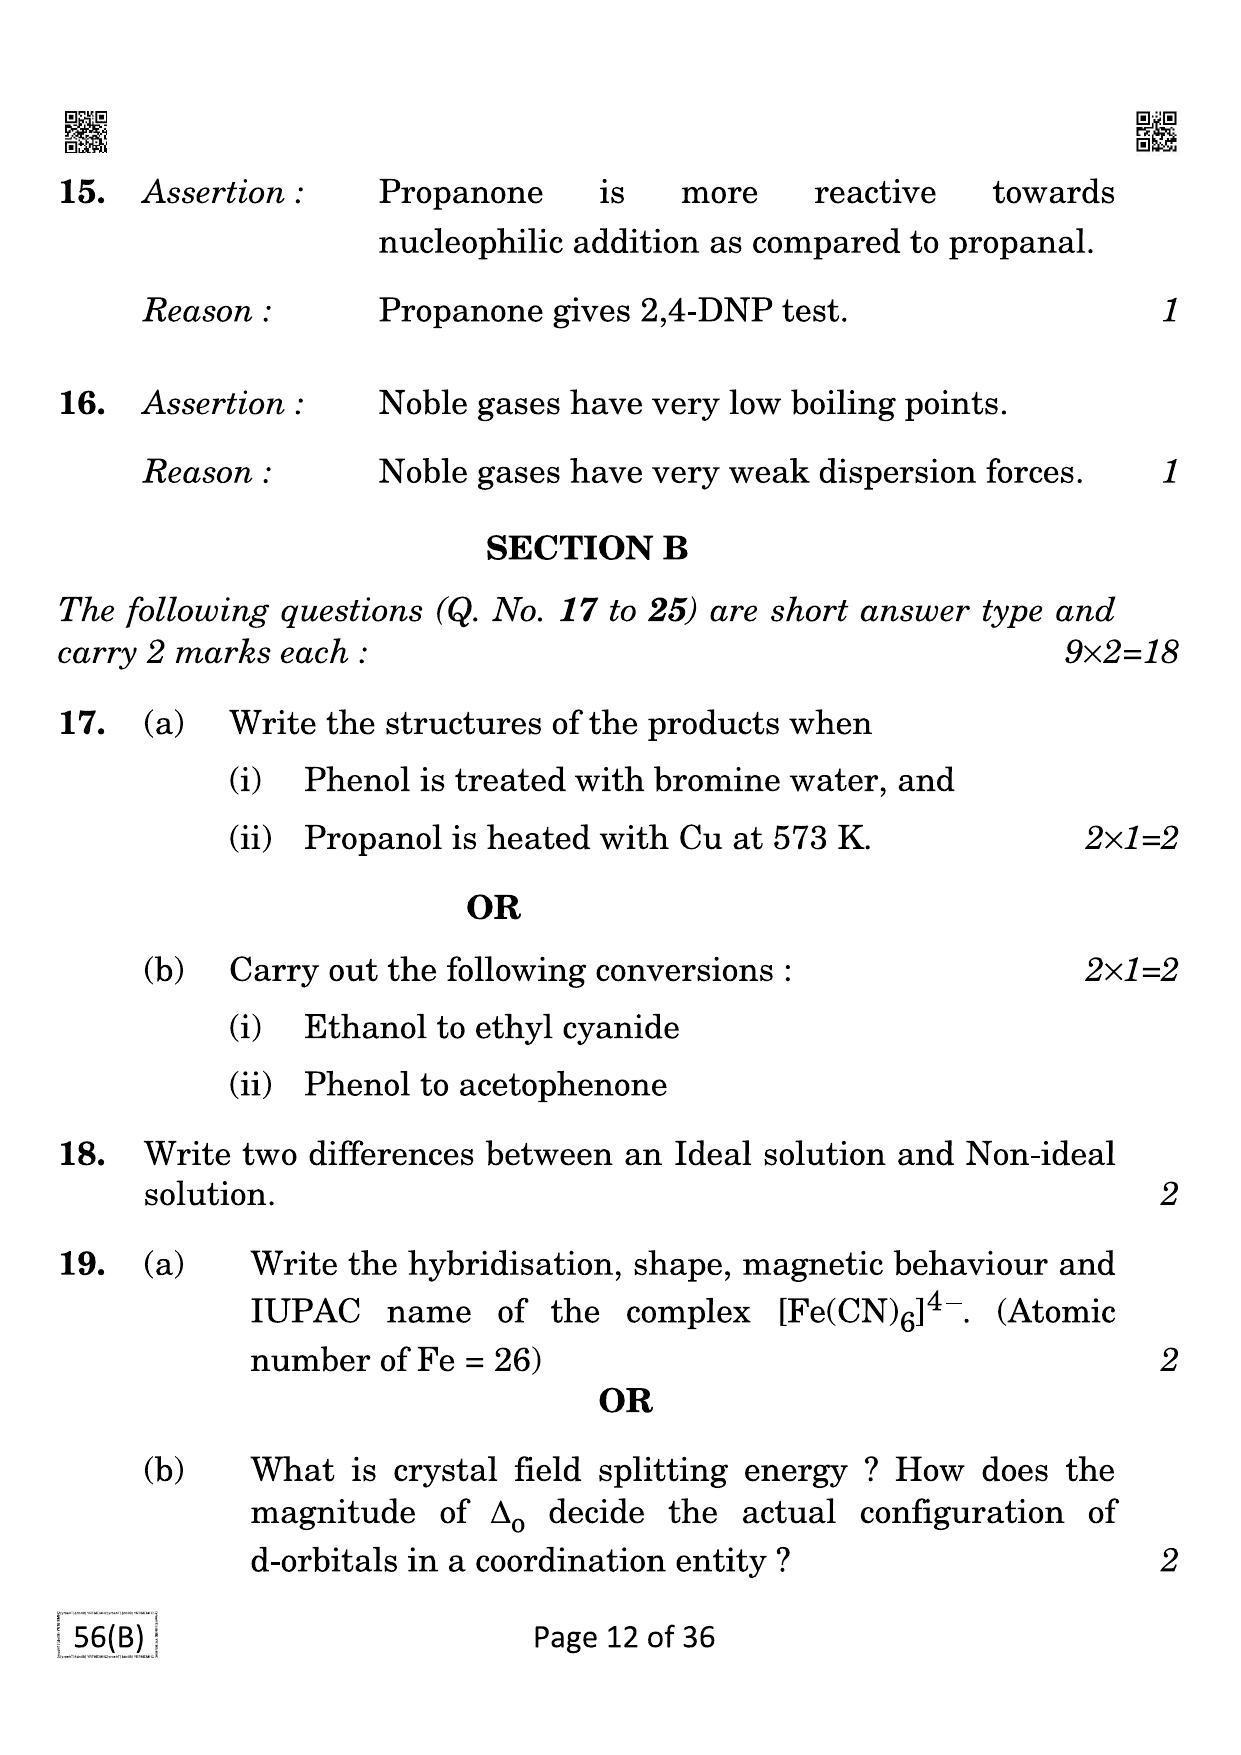 CBSE Class 12 QP_043_CHEMISTRY_FOR_BLIND_CANDIDATES 2021 Compartment Question Paper - Page 12